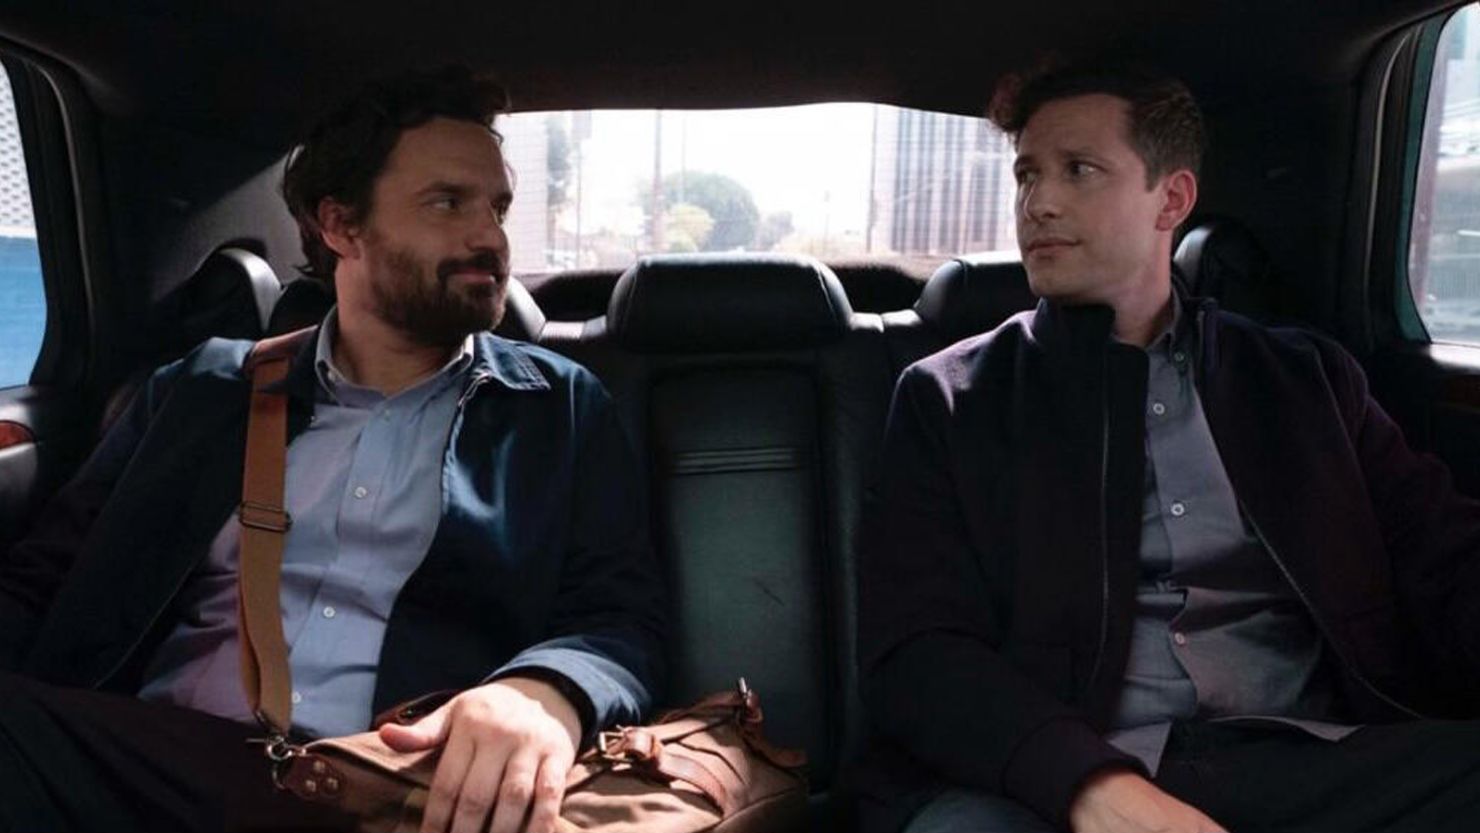 Self Reliance -- When a middle-aged man (Jake Johnson) is invited into a limo by famous actor Andy Samberg, his dull life takes a thrilling turn.  Johnson is offered a chance to win a million dollars in a dark web reality TV show, where assassins from all over the world attempt to kill him for 30 days. The catch? He can't be killed if he's not entirely alone, leading him to recruit an unlikely team to help him survive. Tommy (Jake Johnson) and Andy Samberg (as himself), shown. (Photo: Courtesy of Hulu)